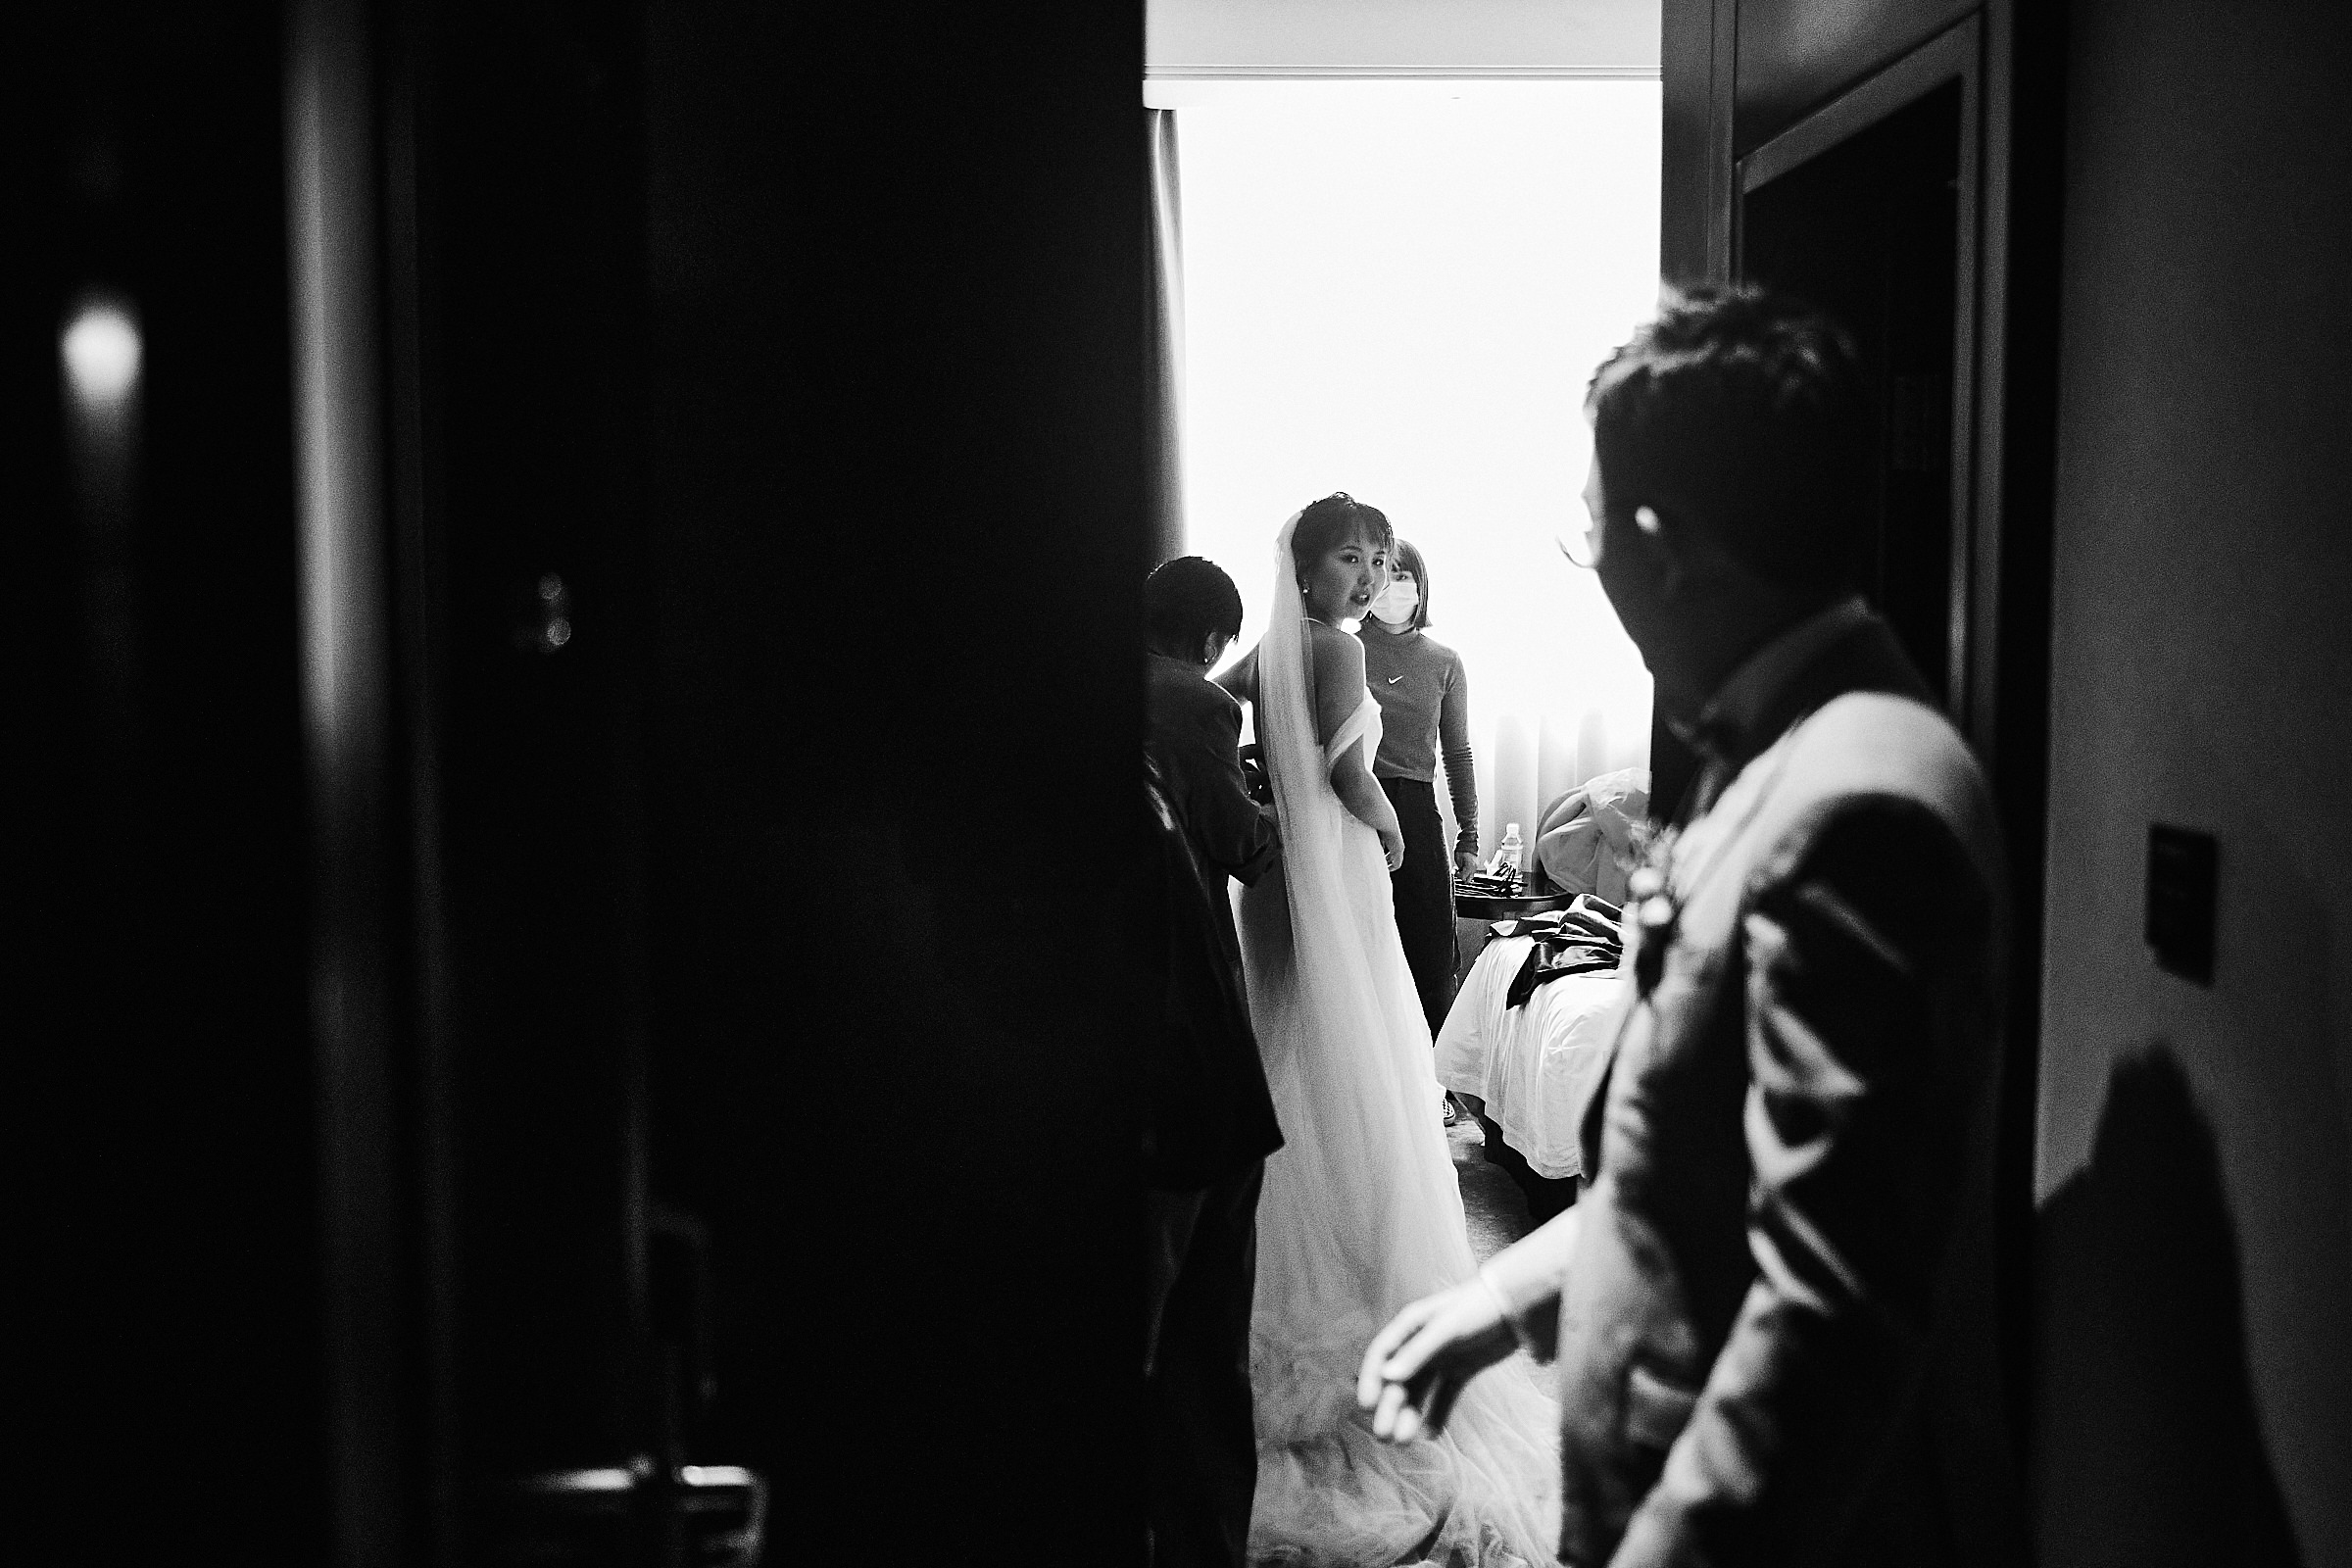 Bride Is Fixing Details Of Her Dress As Groom Looks At Her